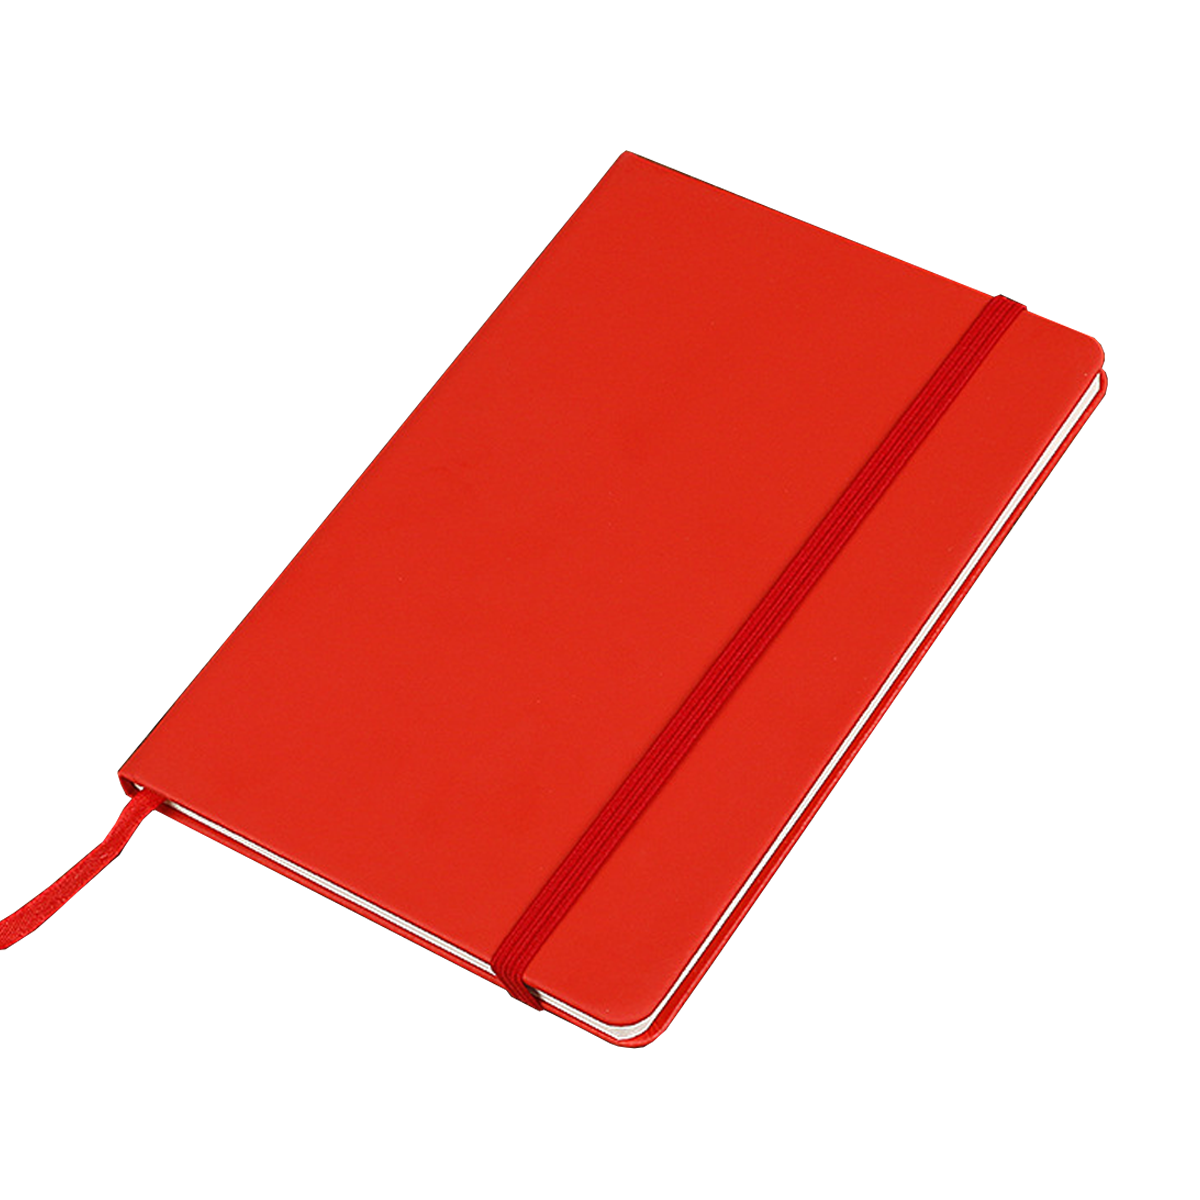 Olmecs PU Soft Leather Covered Notebook With Elastic Strap - Red